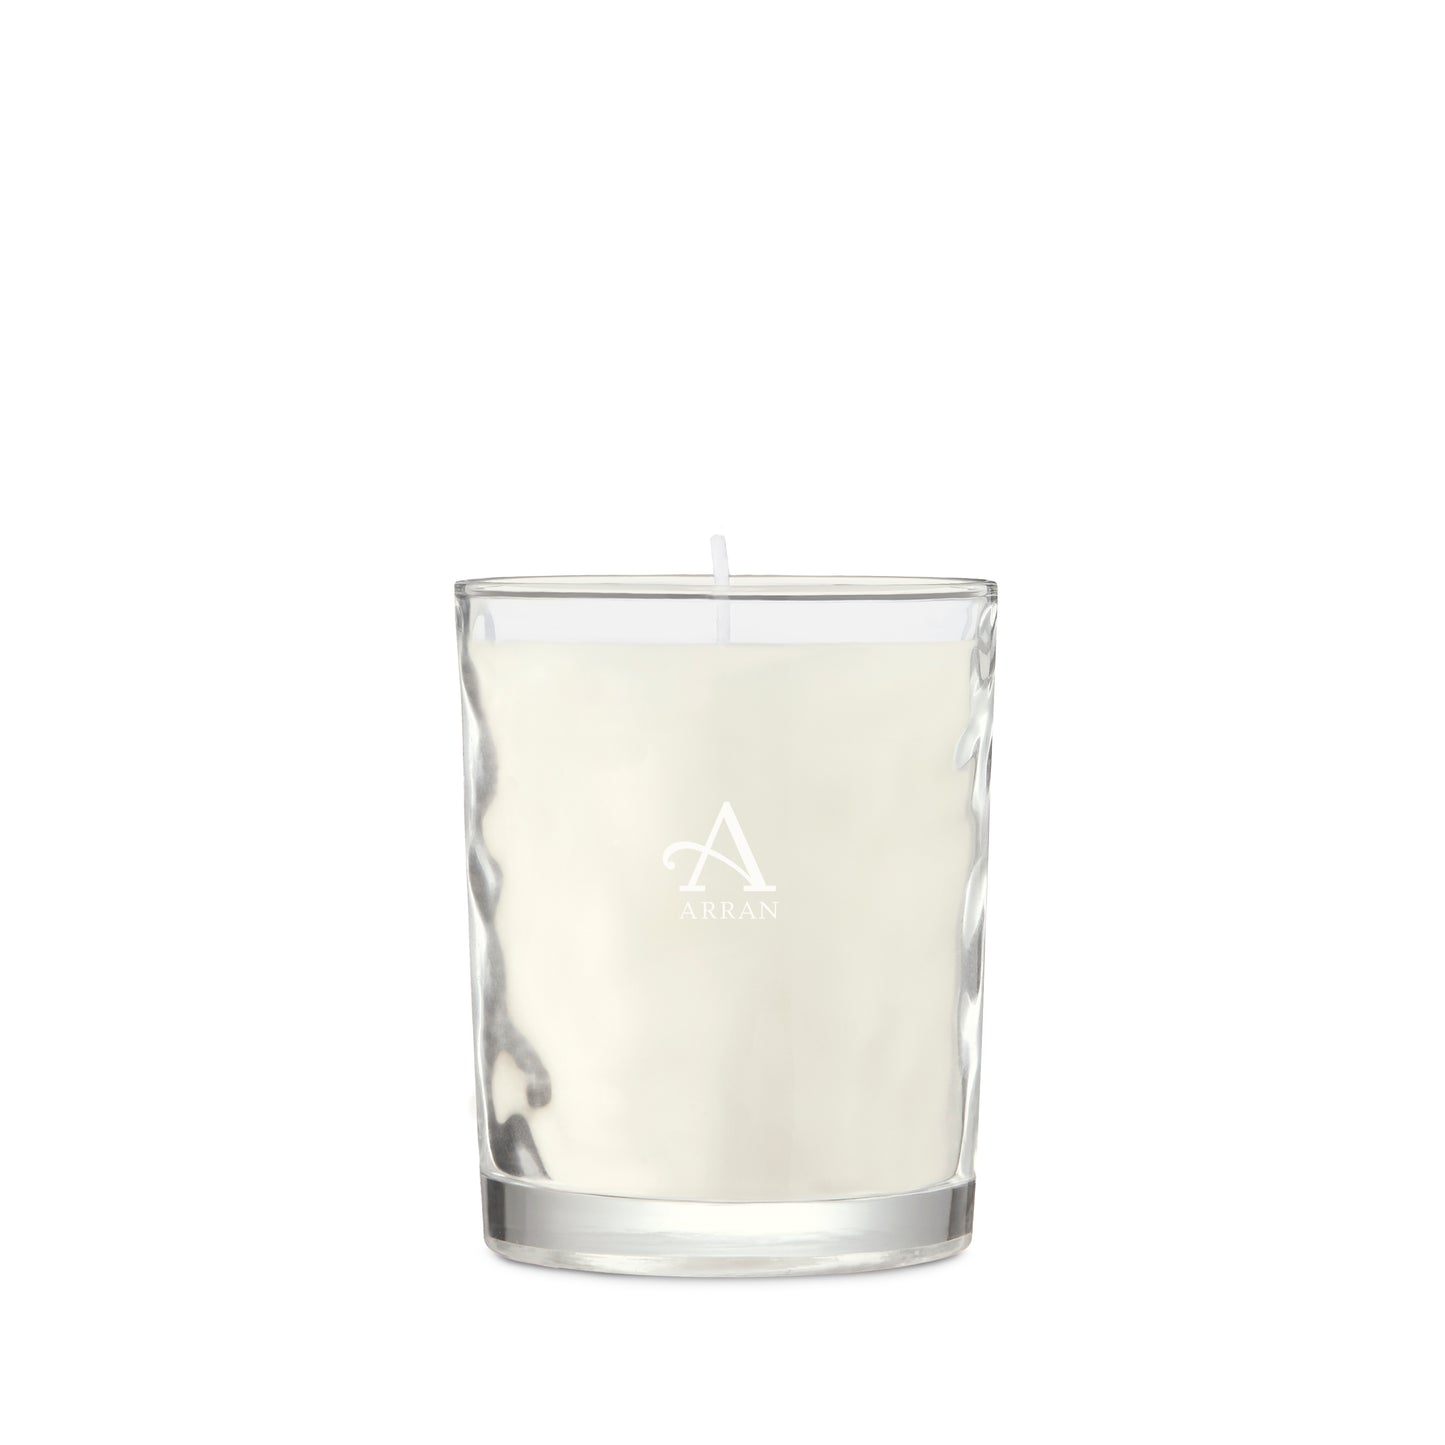 After The Rain Scented Candle 35cl | 【雨後系列】家居蠟燭 35厘升